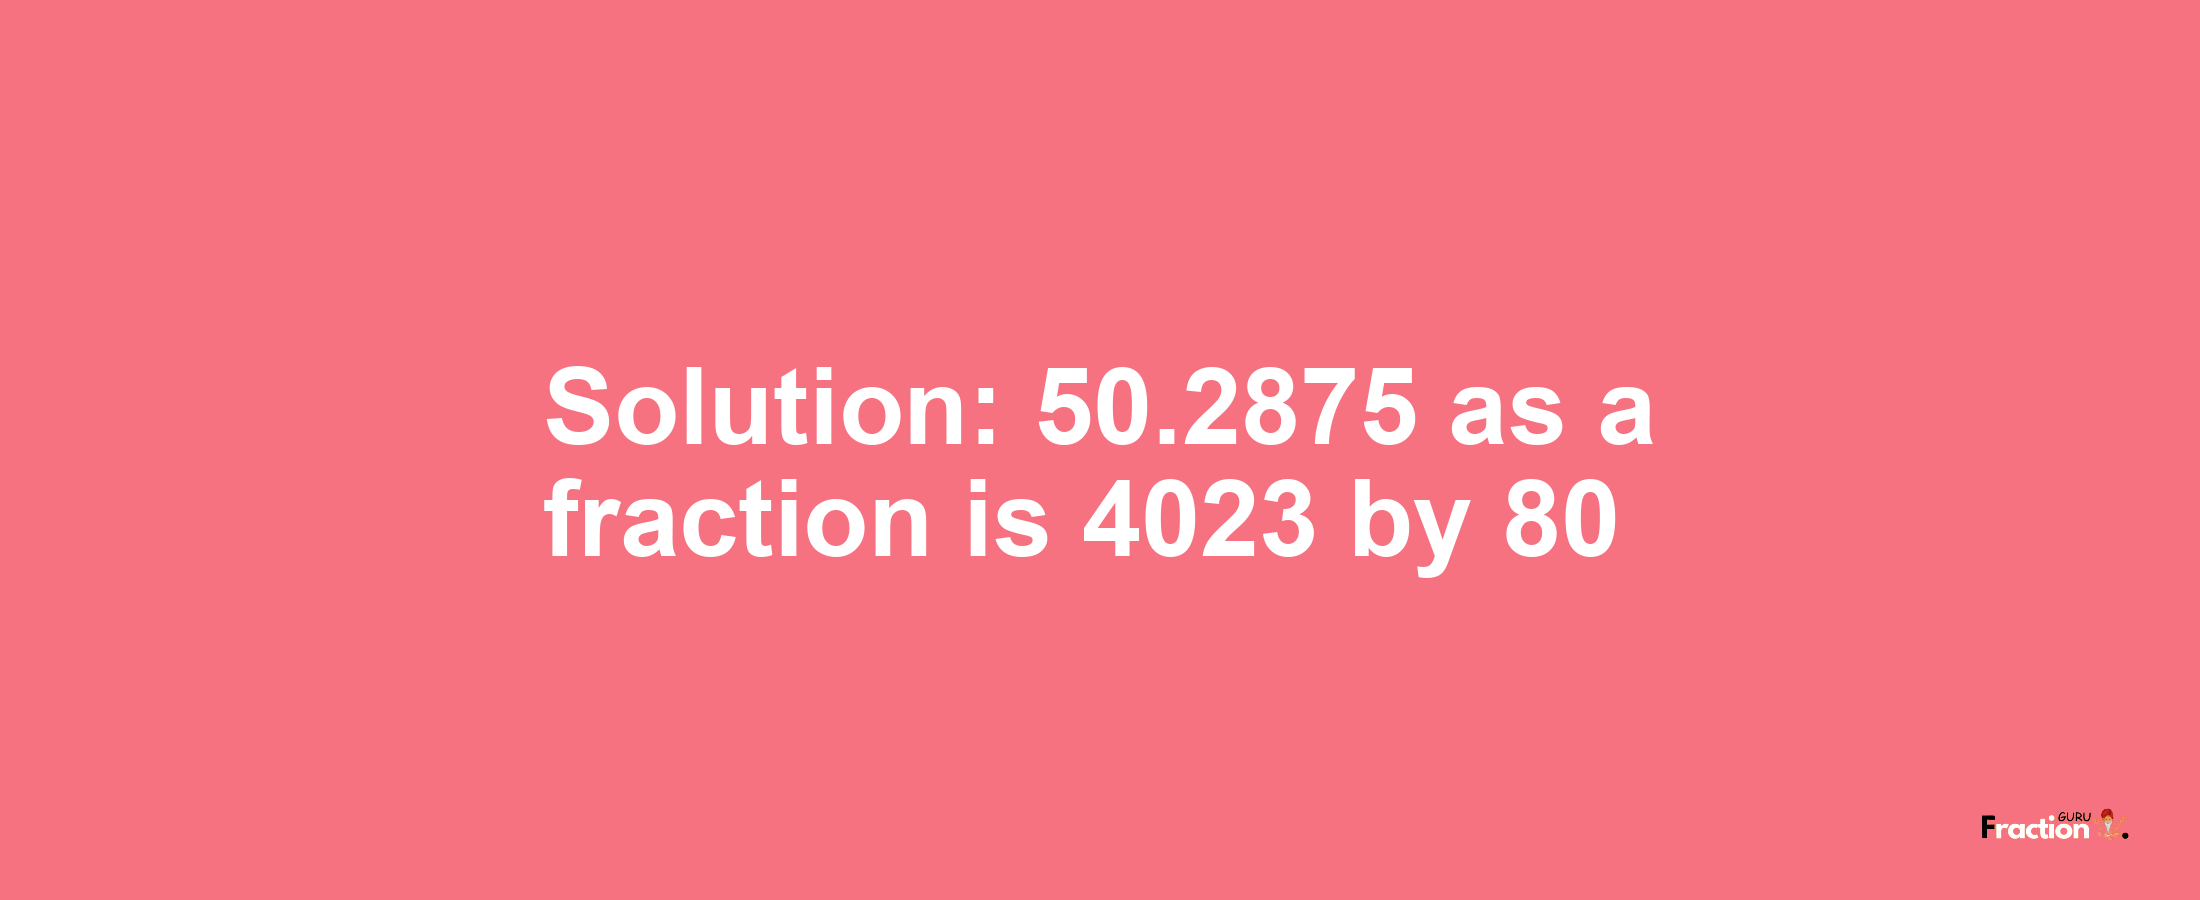 Solution:50.2875 as a fraction is 4023/80